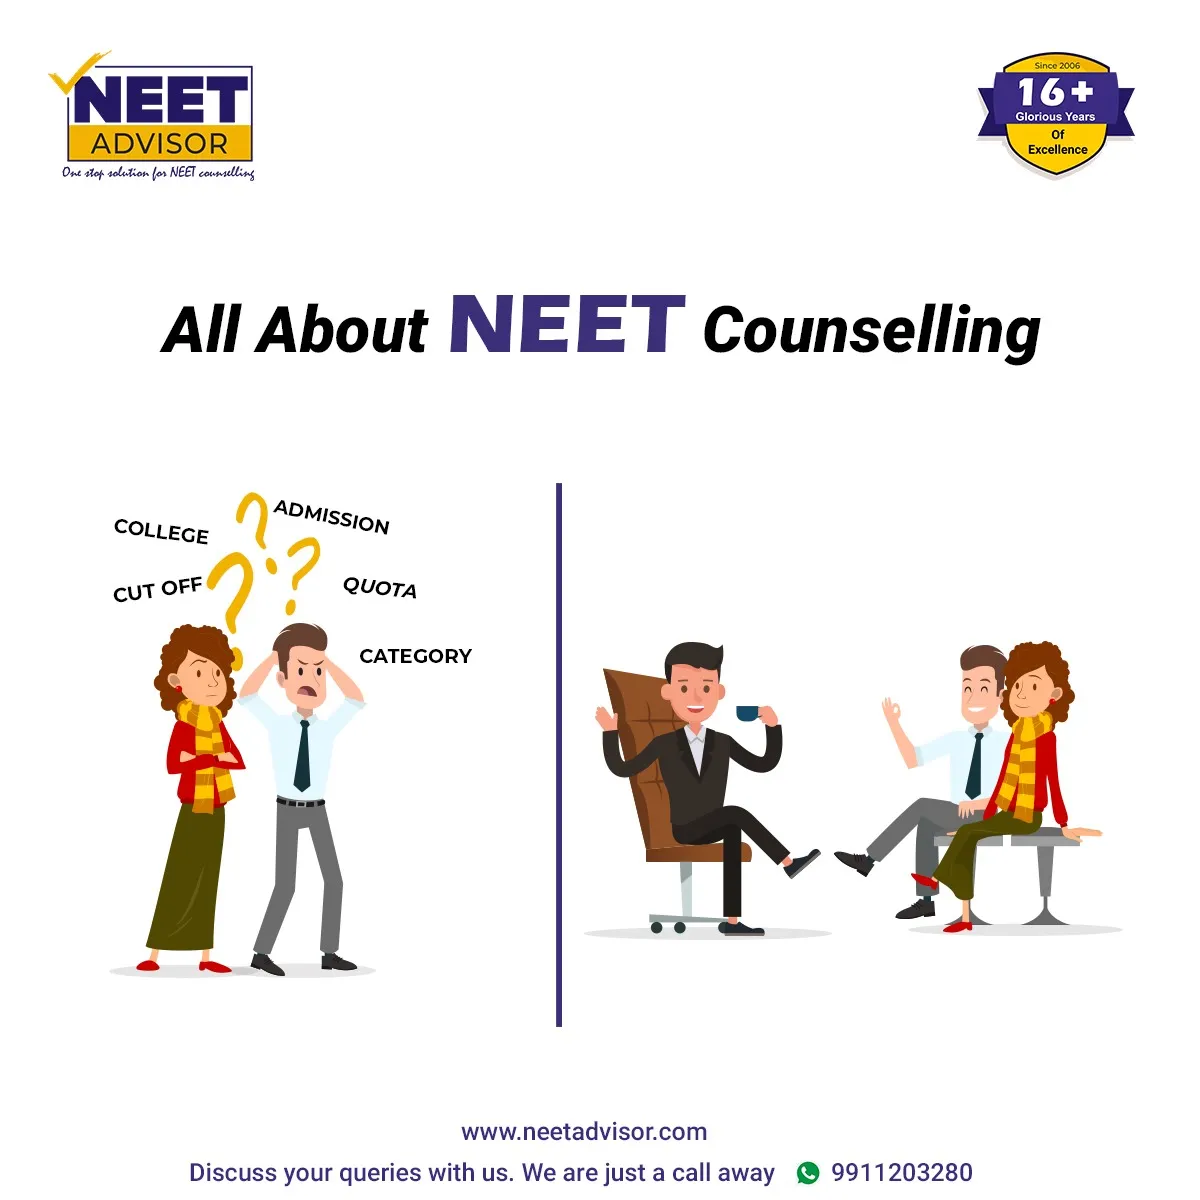 All About NEET counselling